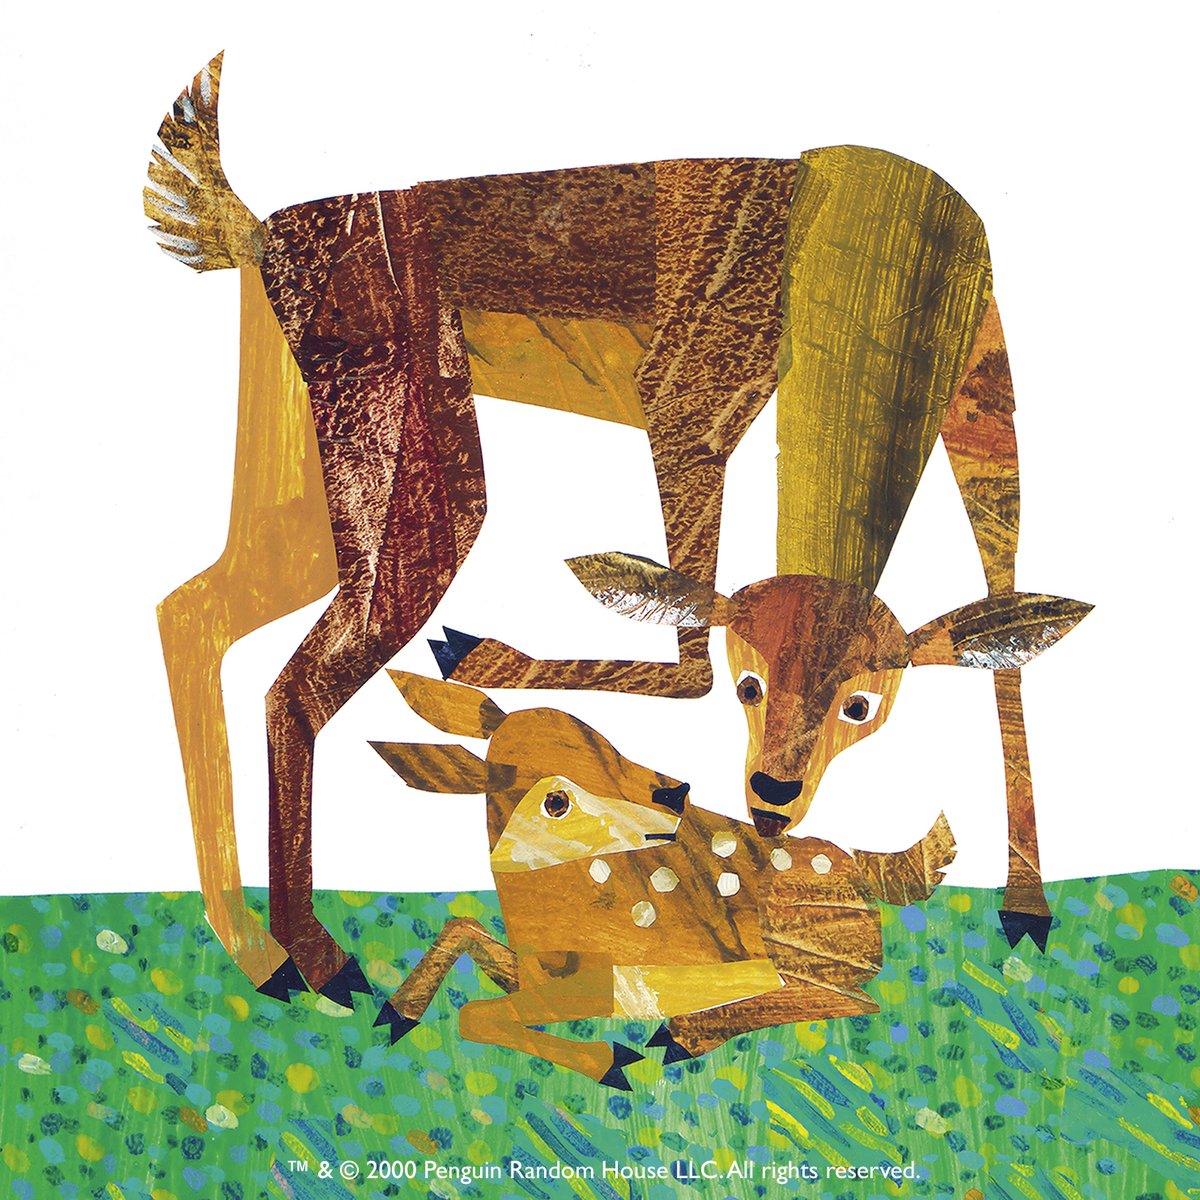 Happy Mother’s Day! Illustration for “Does a Kangaroo Have a Mother, Too?”, published in 2000.